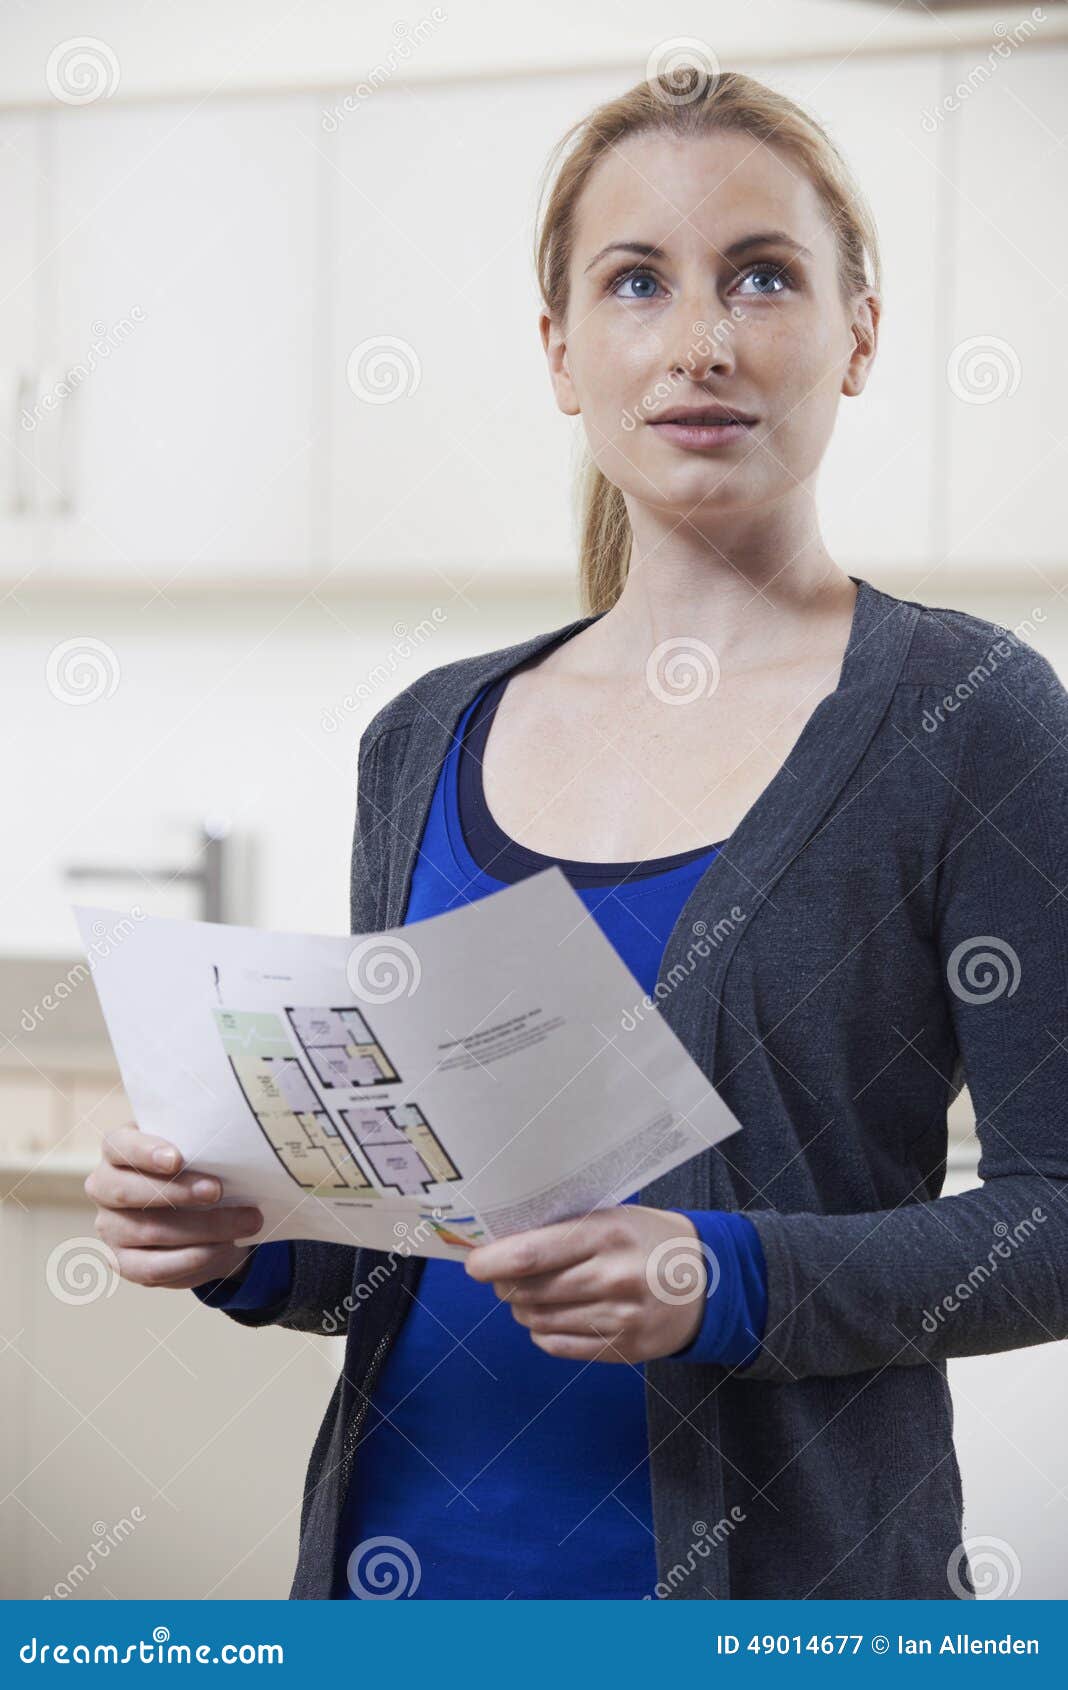 woman looking at details for property she hopes to buy